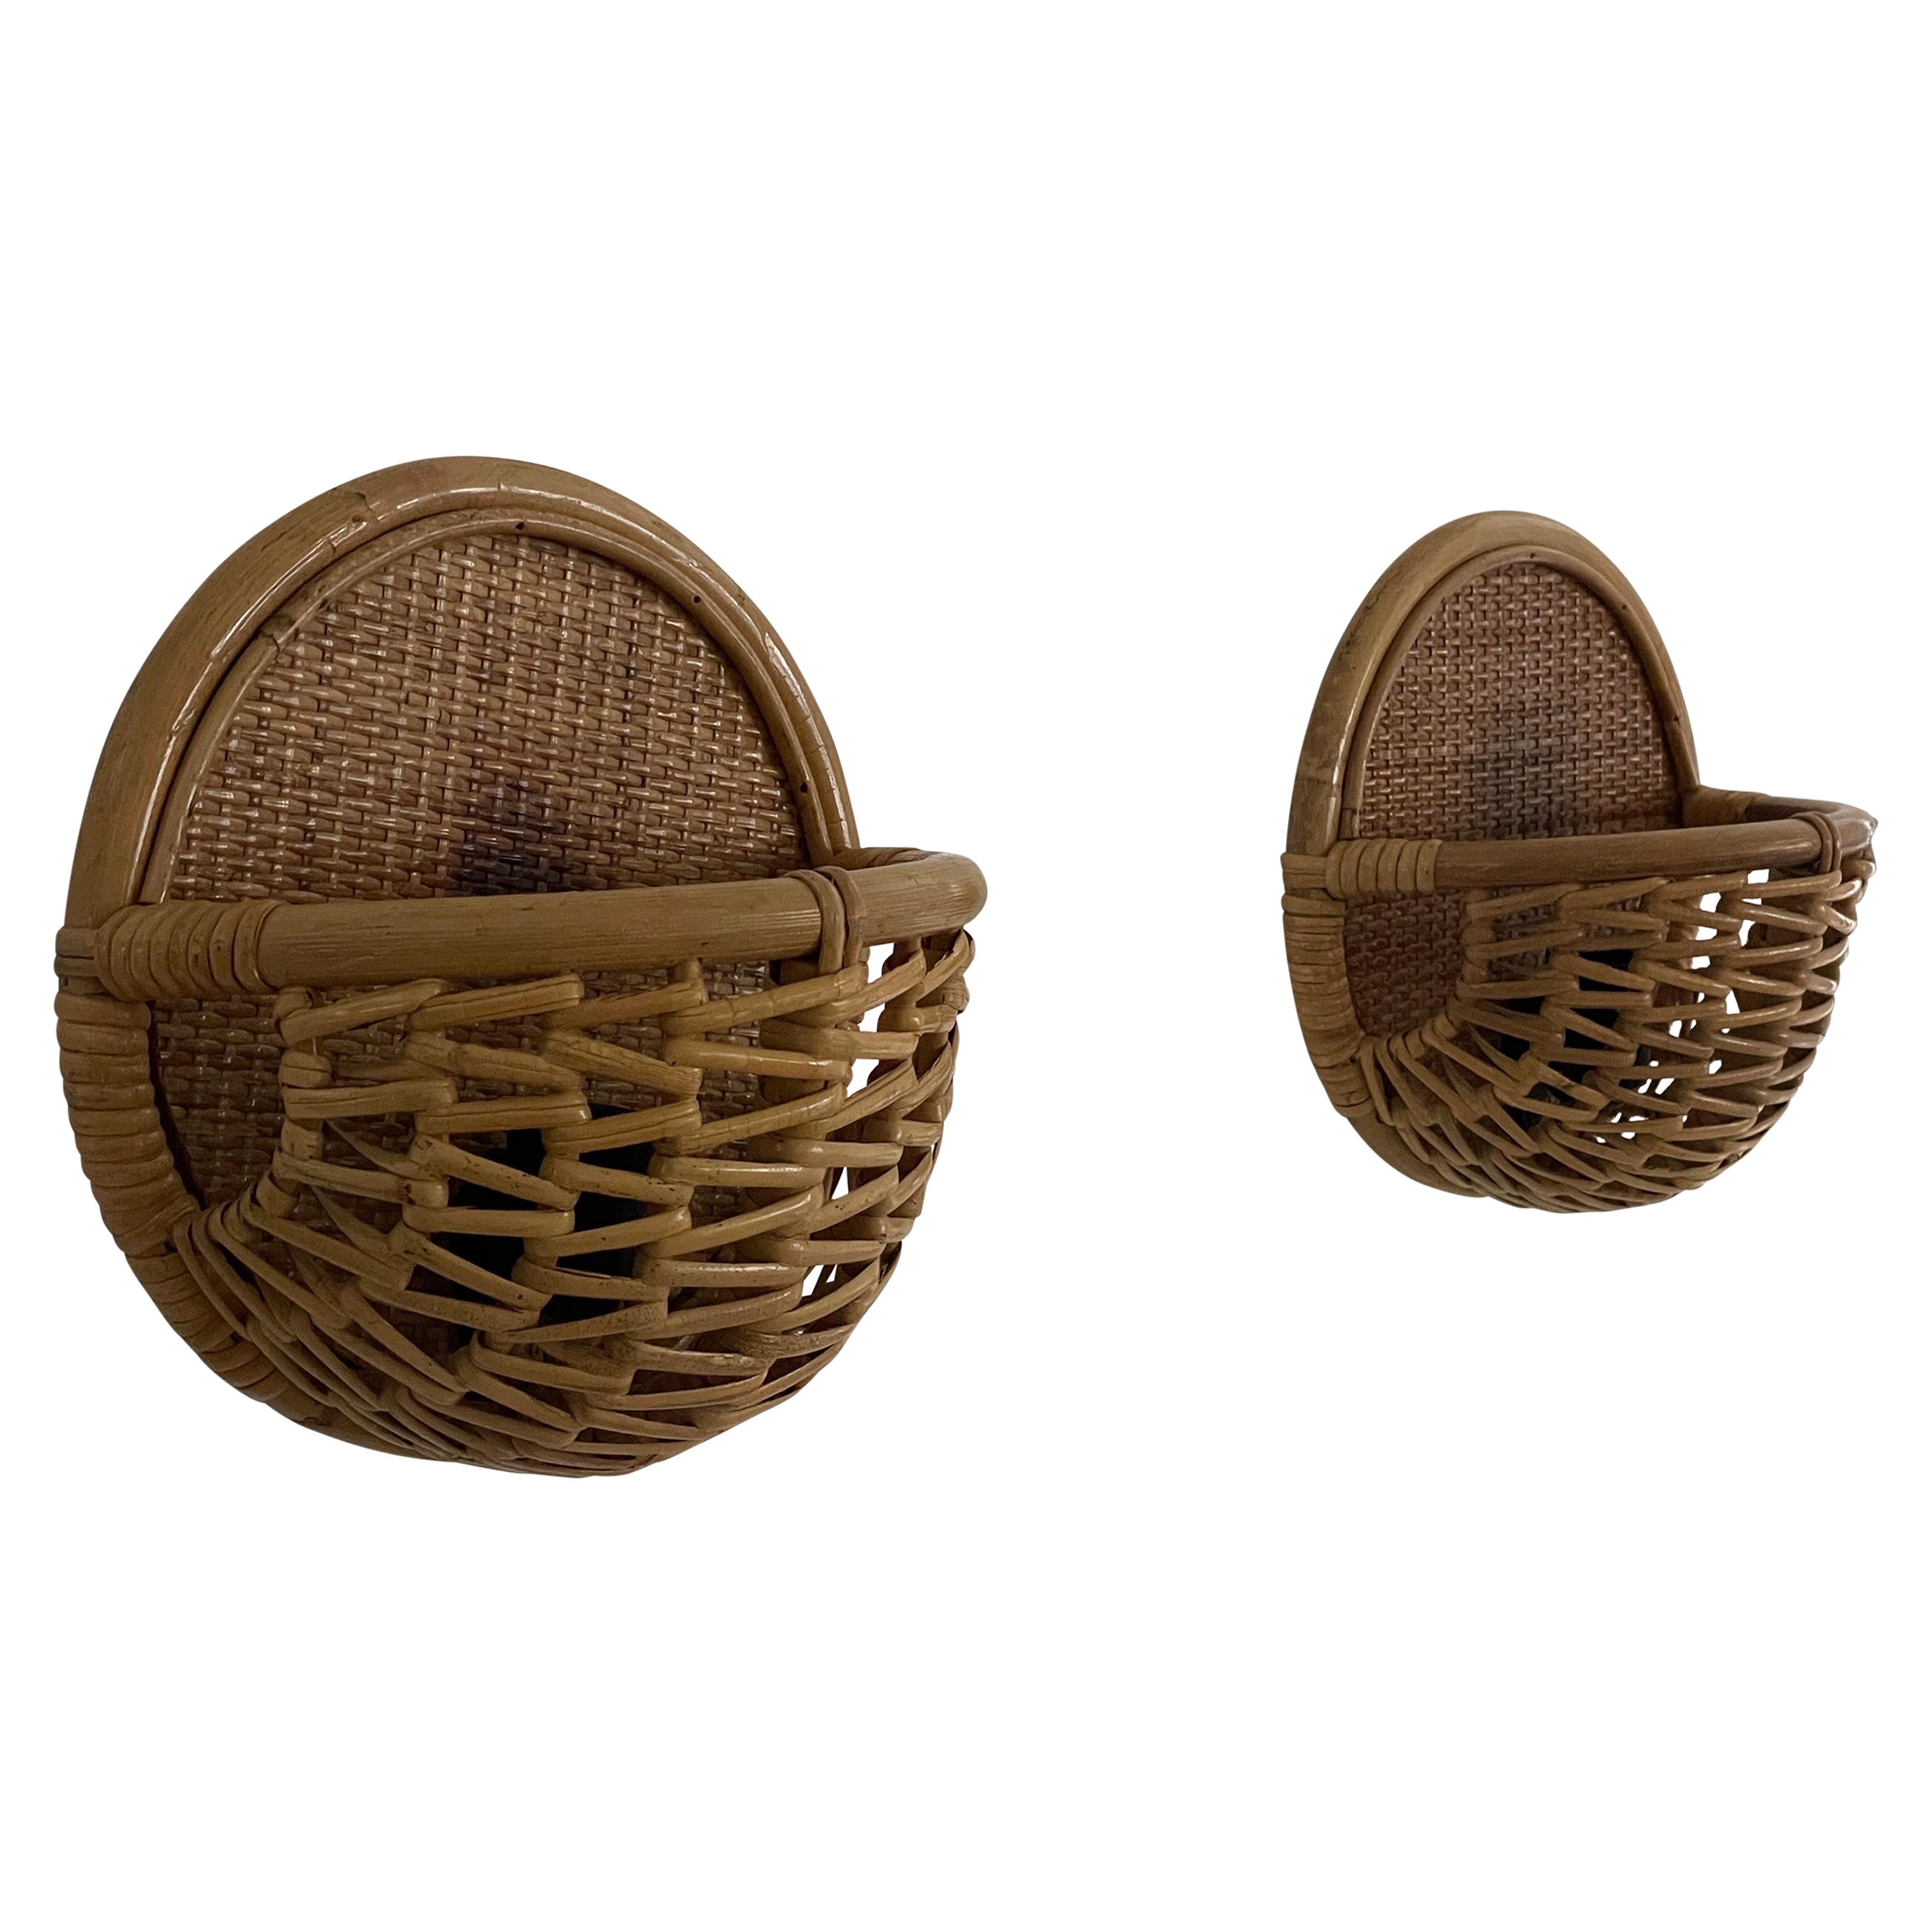 Wicker and Bamboo Round Design Pair of Wall Lamps, 1950s, Italy For Sale